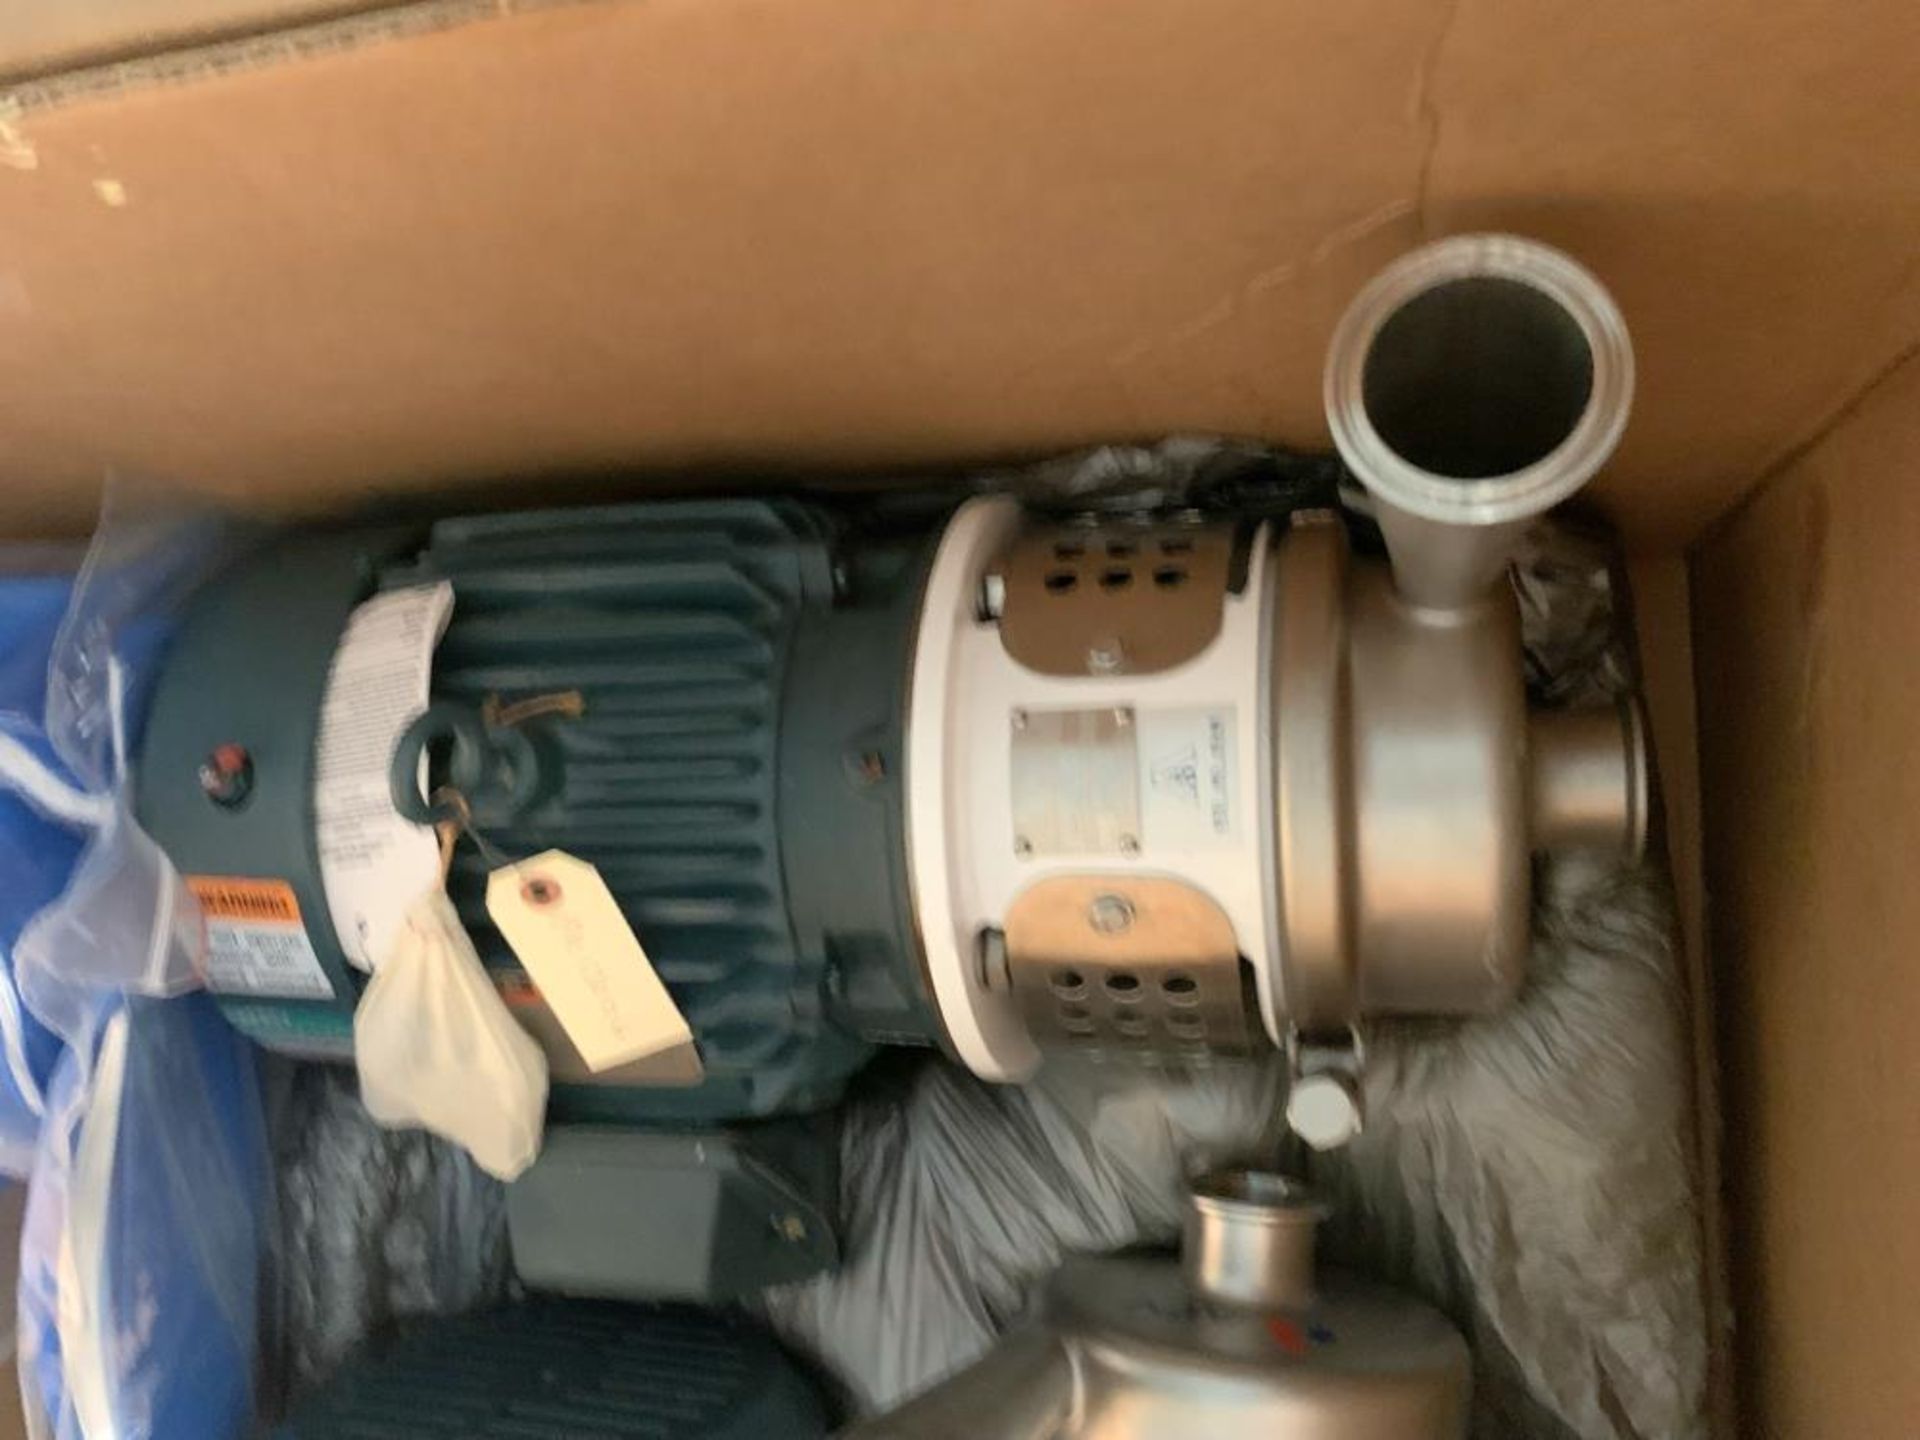 Unused- APV Crepaco Centrifugal Pump, Stainless Steel, Model W20/20. Approximate 105 gallons per min